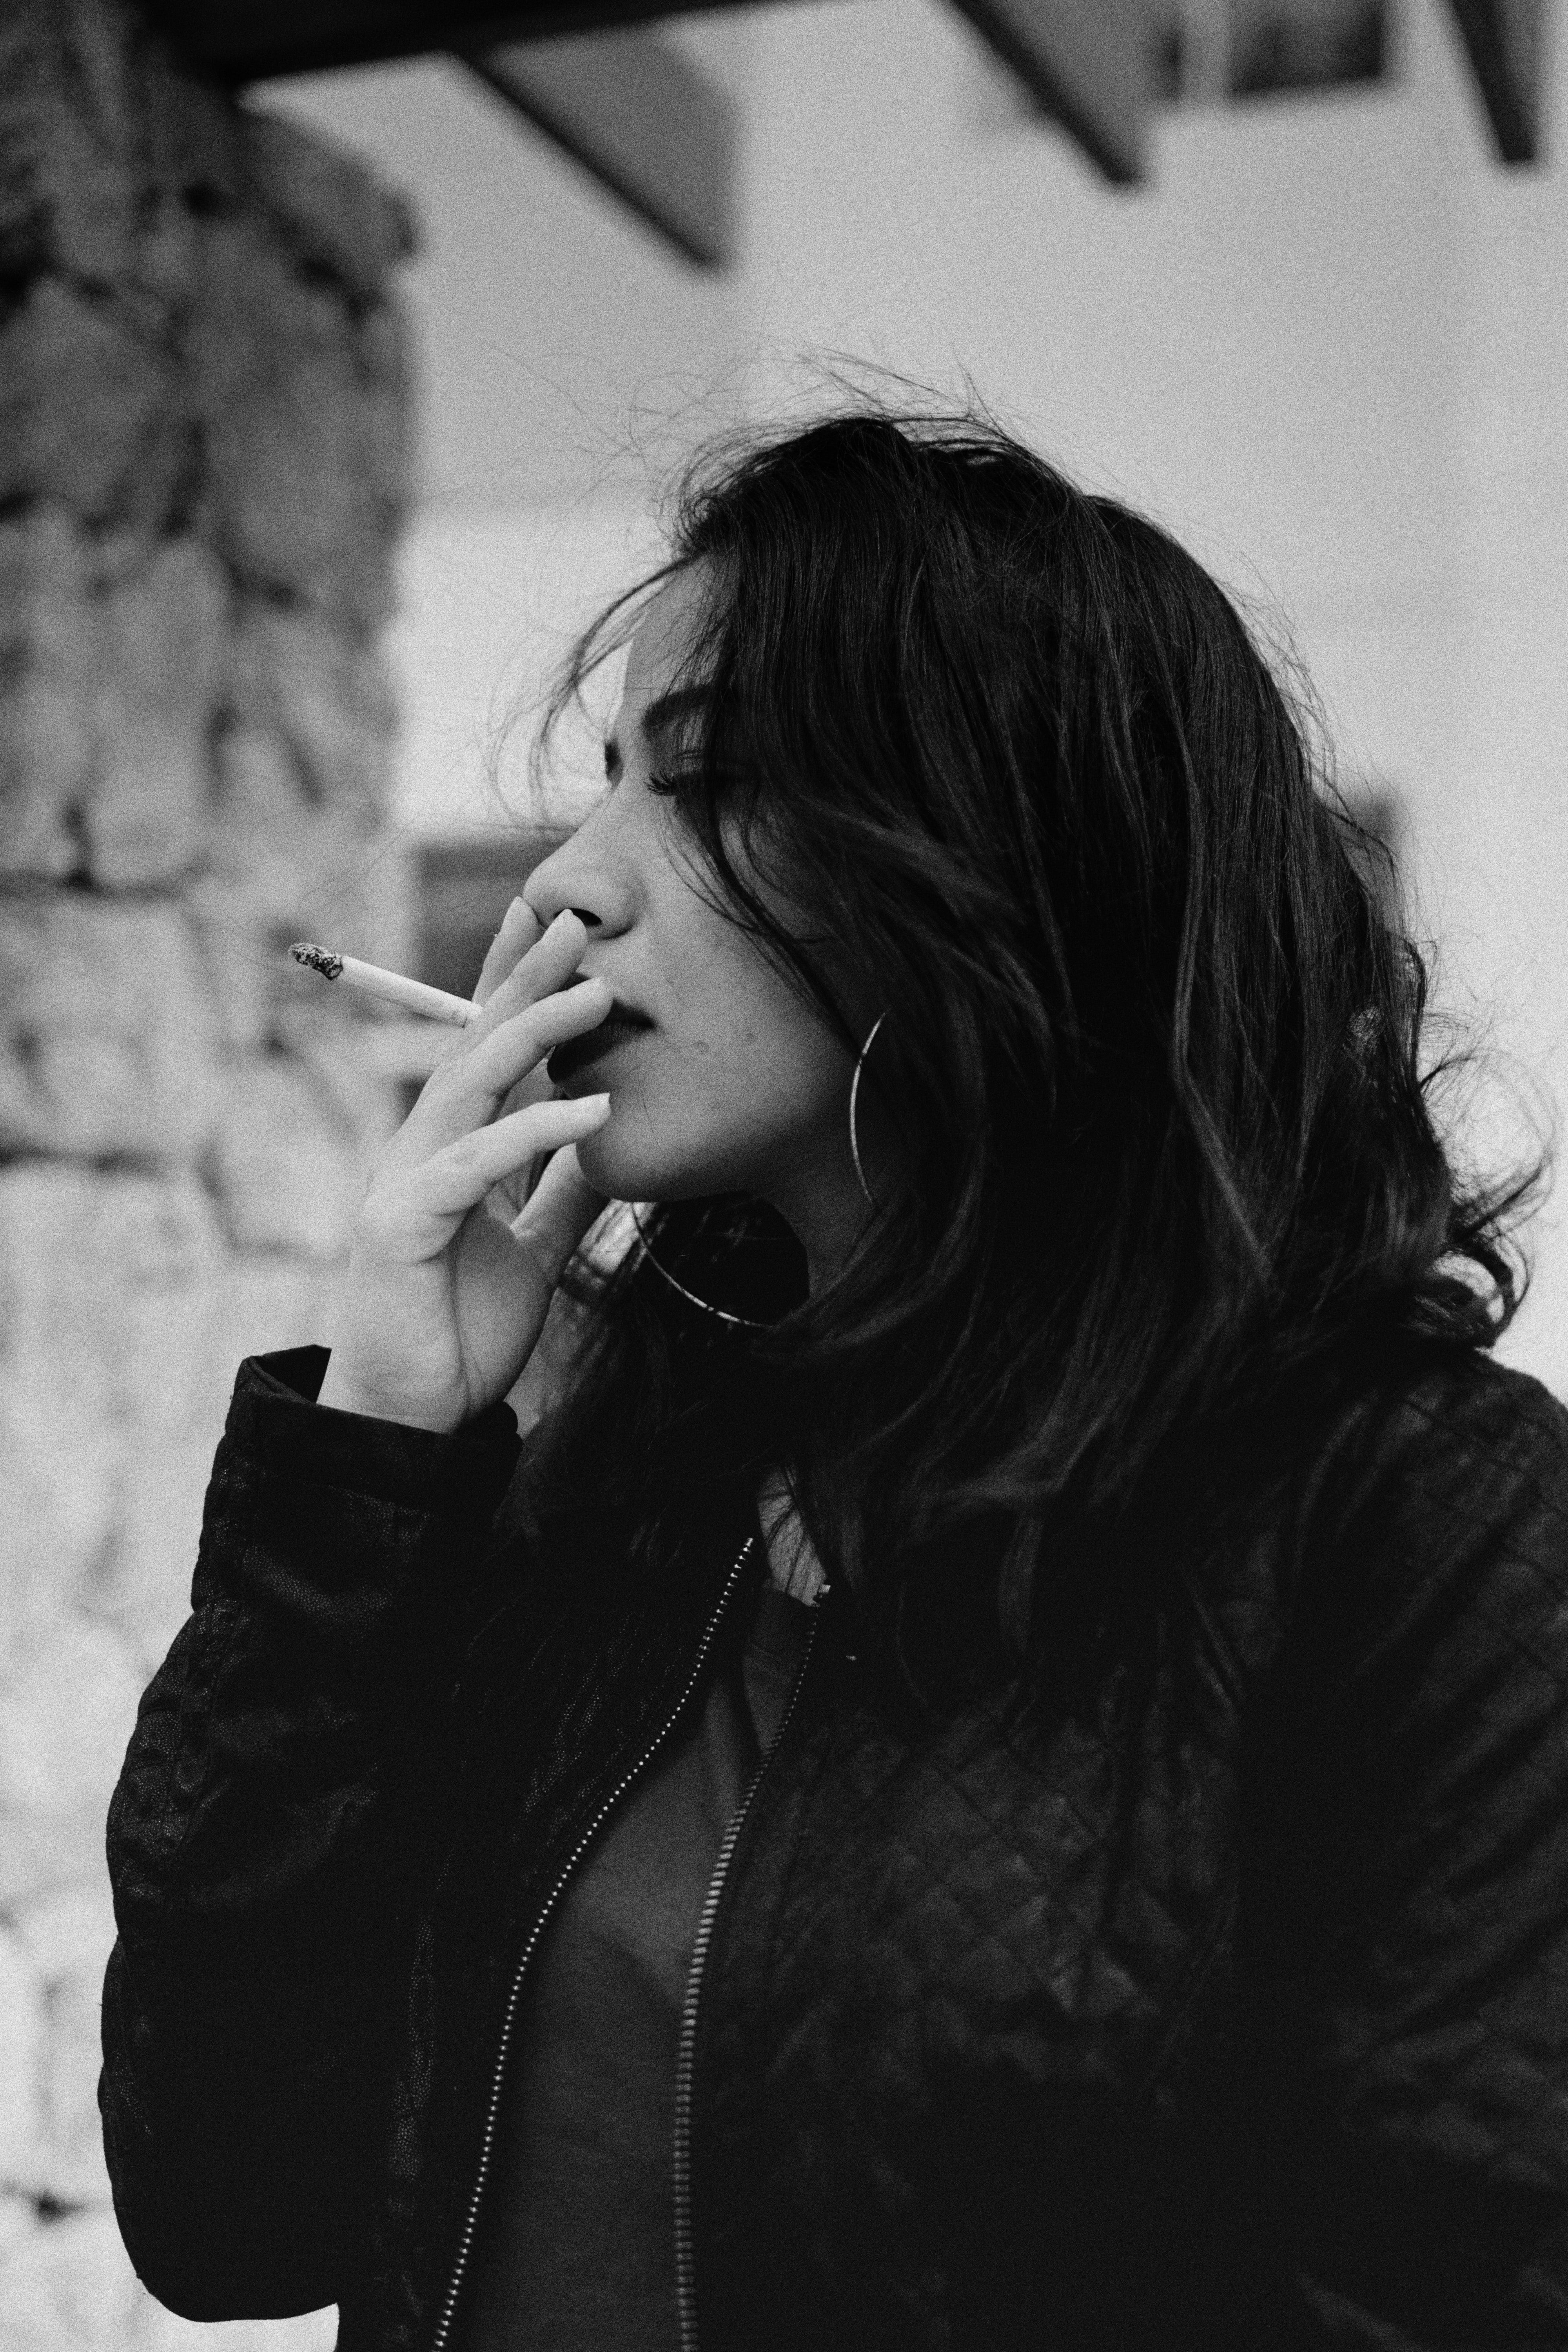 Woman Smoking in Grayscale Photo · Free